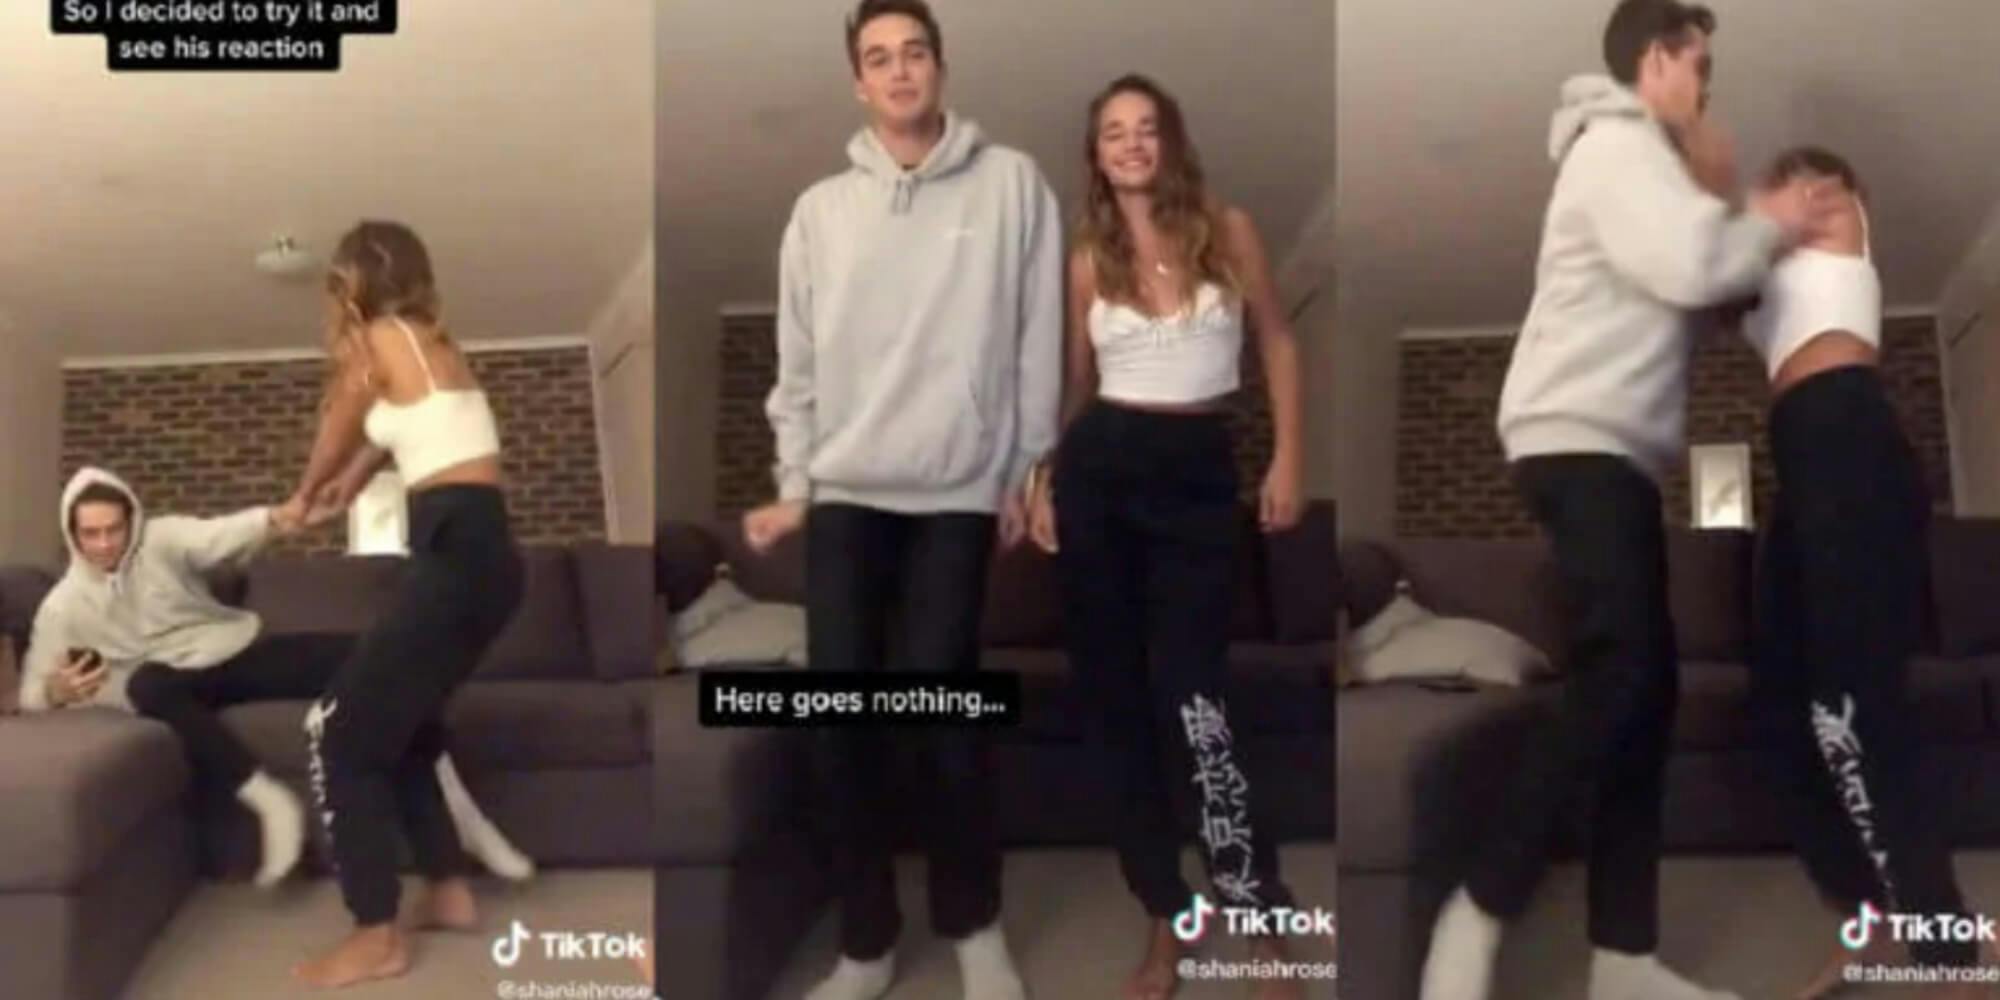 Three panels show a young white man and young white woman side by side. They show the progression of the woman asking him to film a TikTok with her, then subsequently trying to kiss him.